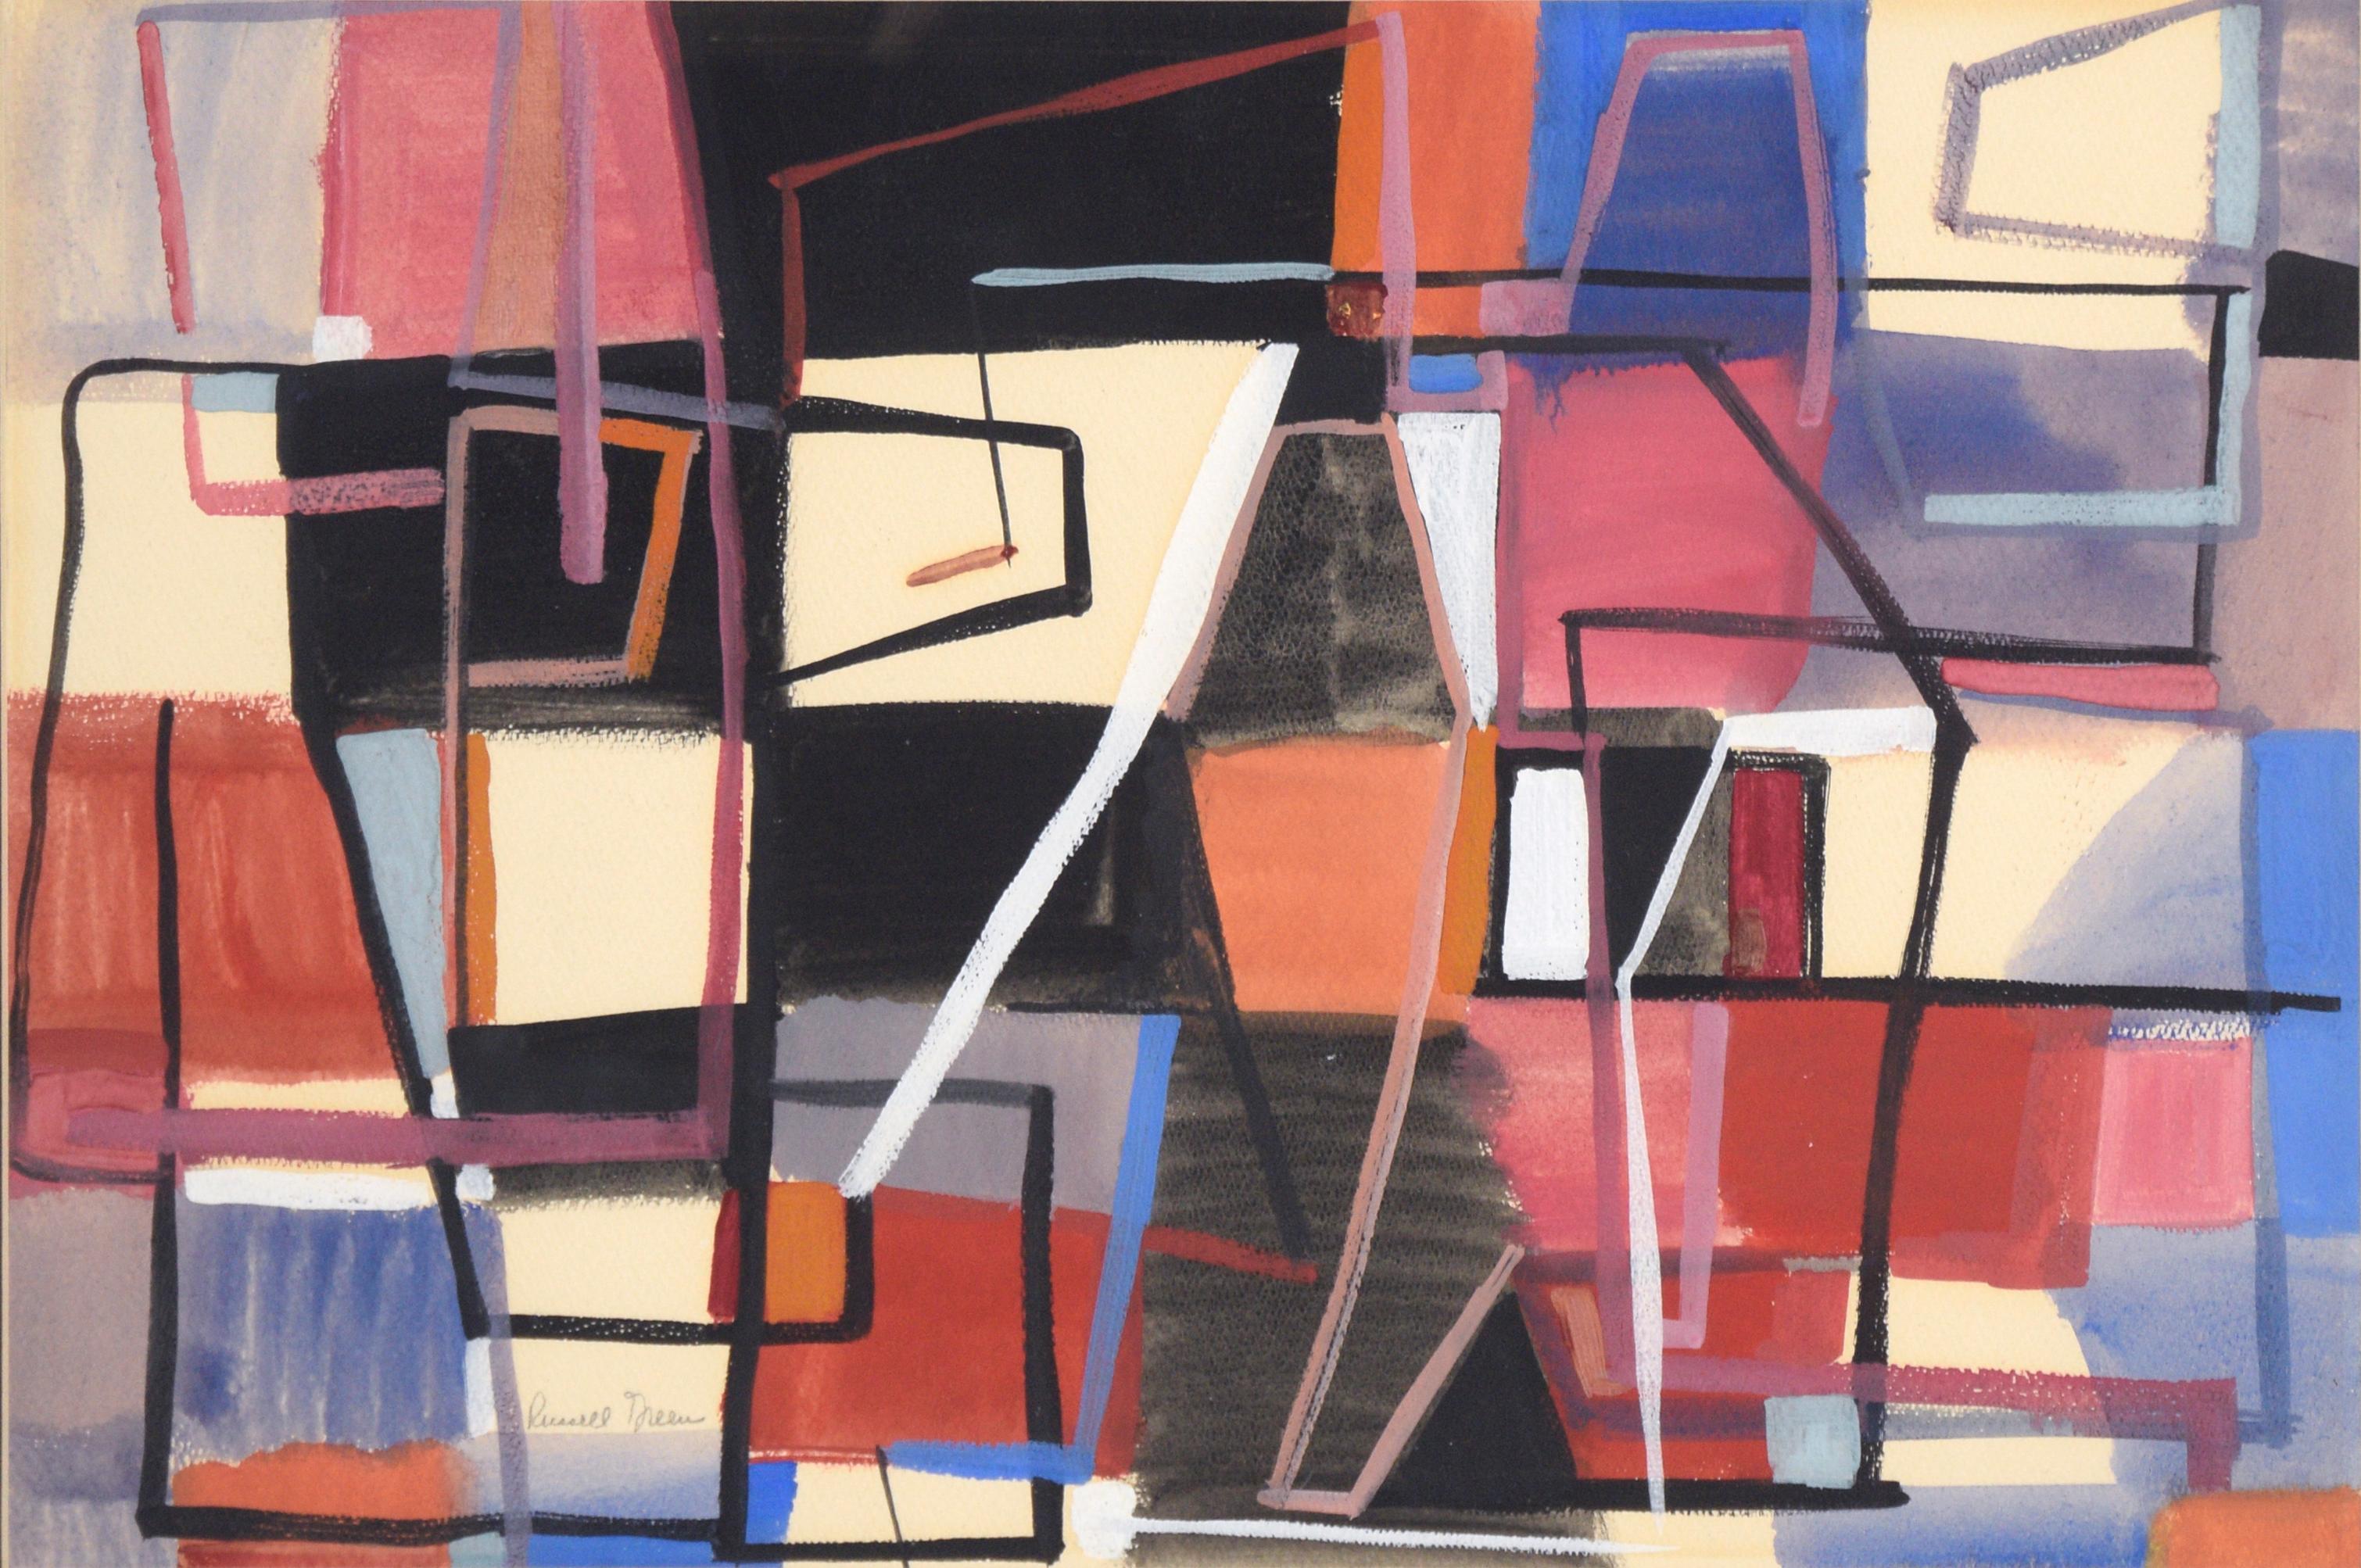 Geometric Abstract in Blue, Red, Black, and White - Acrylic on Paper - Painting by Russell Green